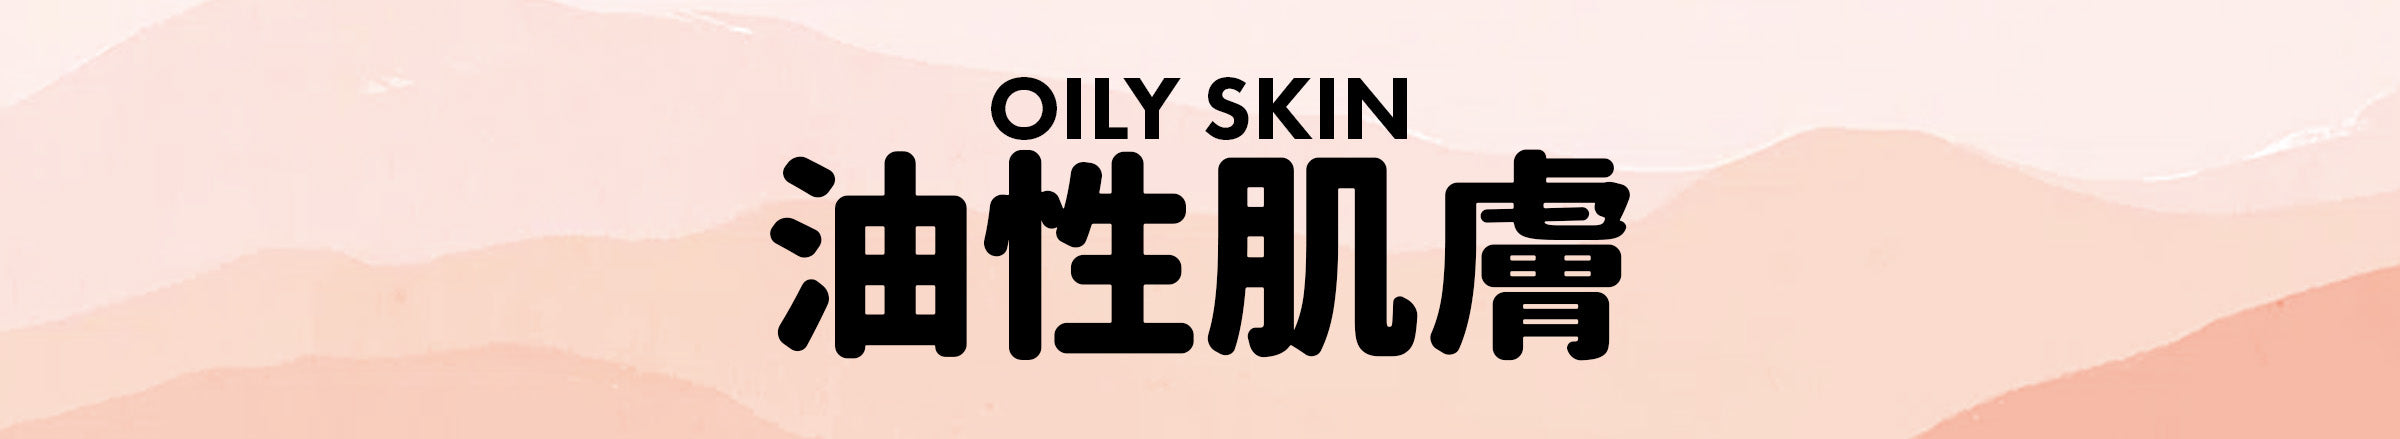 Oily Skin Type Products